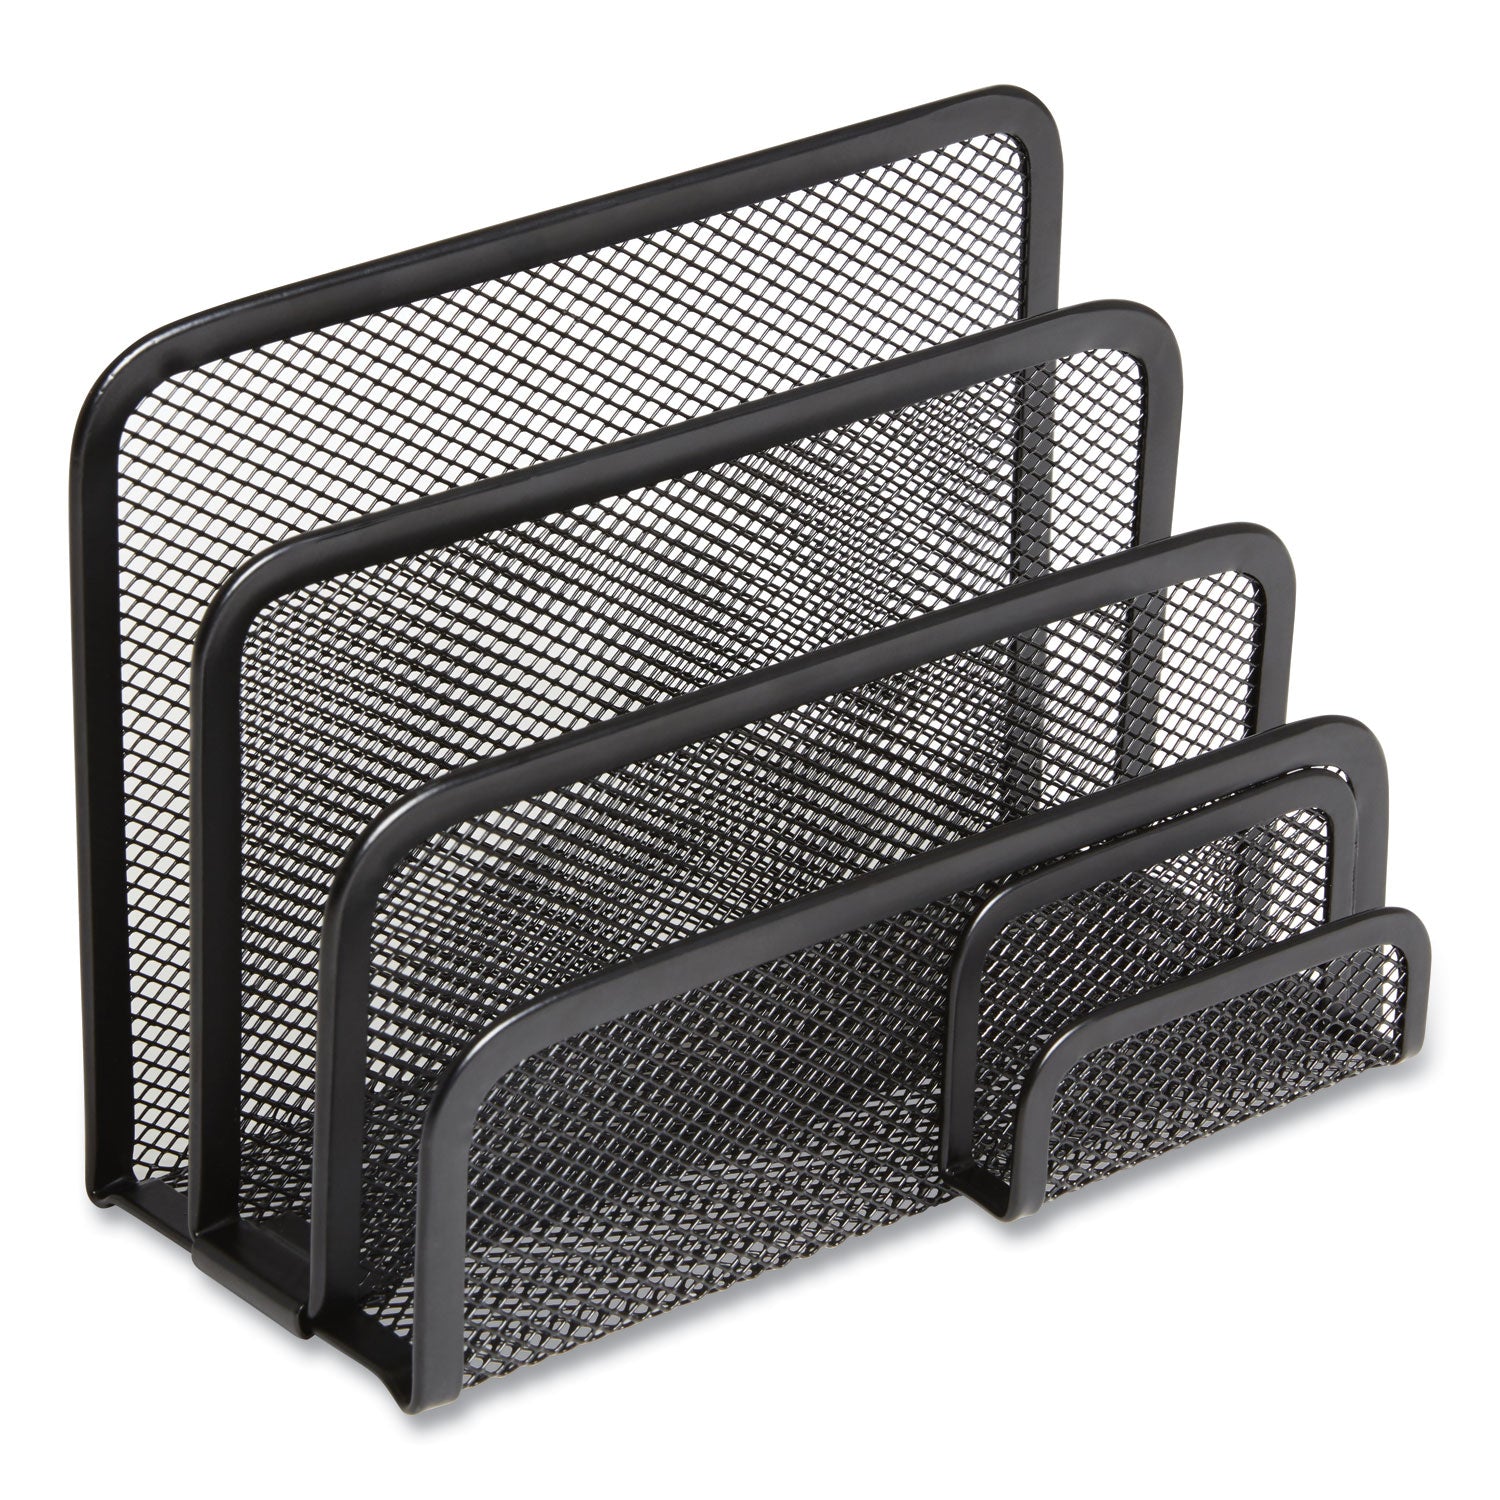 wire-mesh-mail-sorter-with-business-card-holder-4-sections-#6-1-4-to-#16-envelopes-559-x-393-x-755-matte-black_tud24402451 - 4